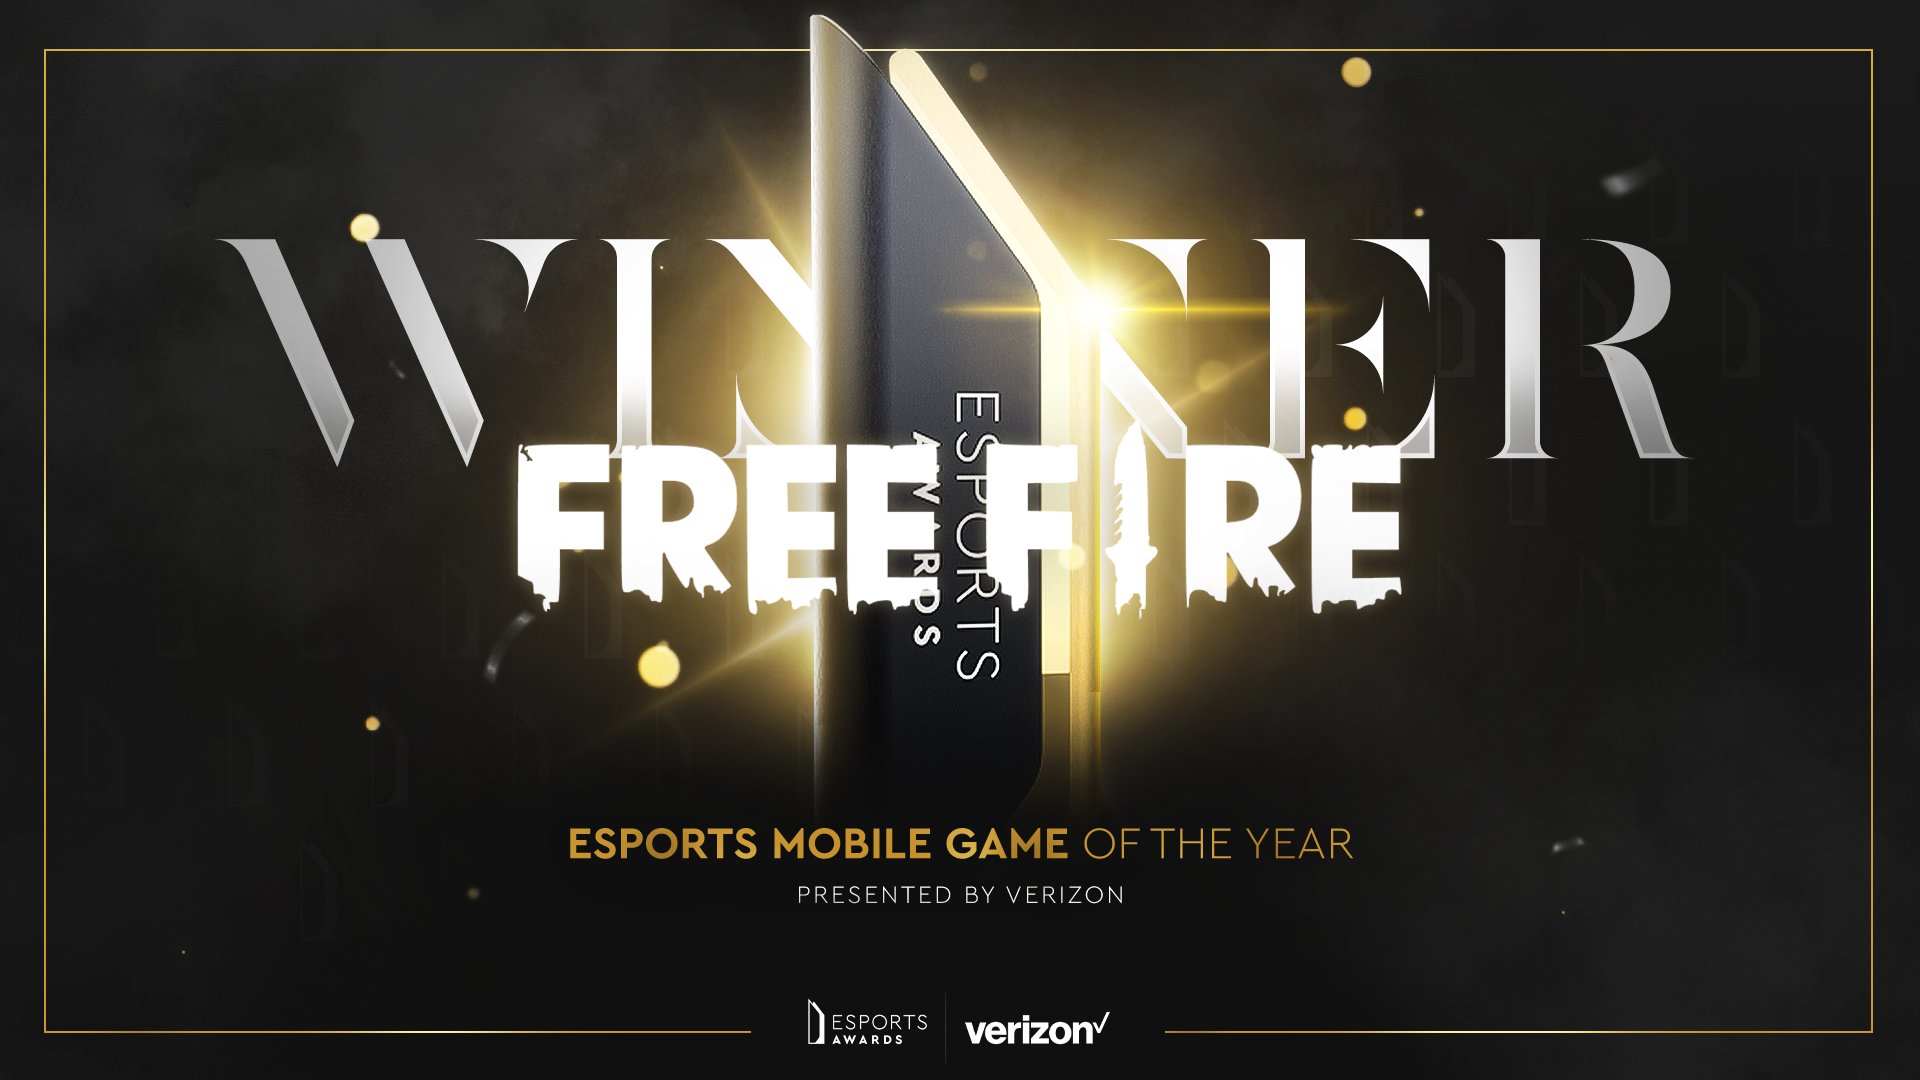 Winner of the Esports Mobile Game of the Year award - @esportsawards